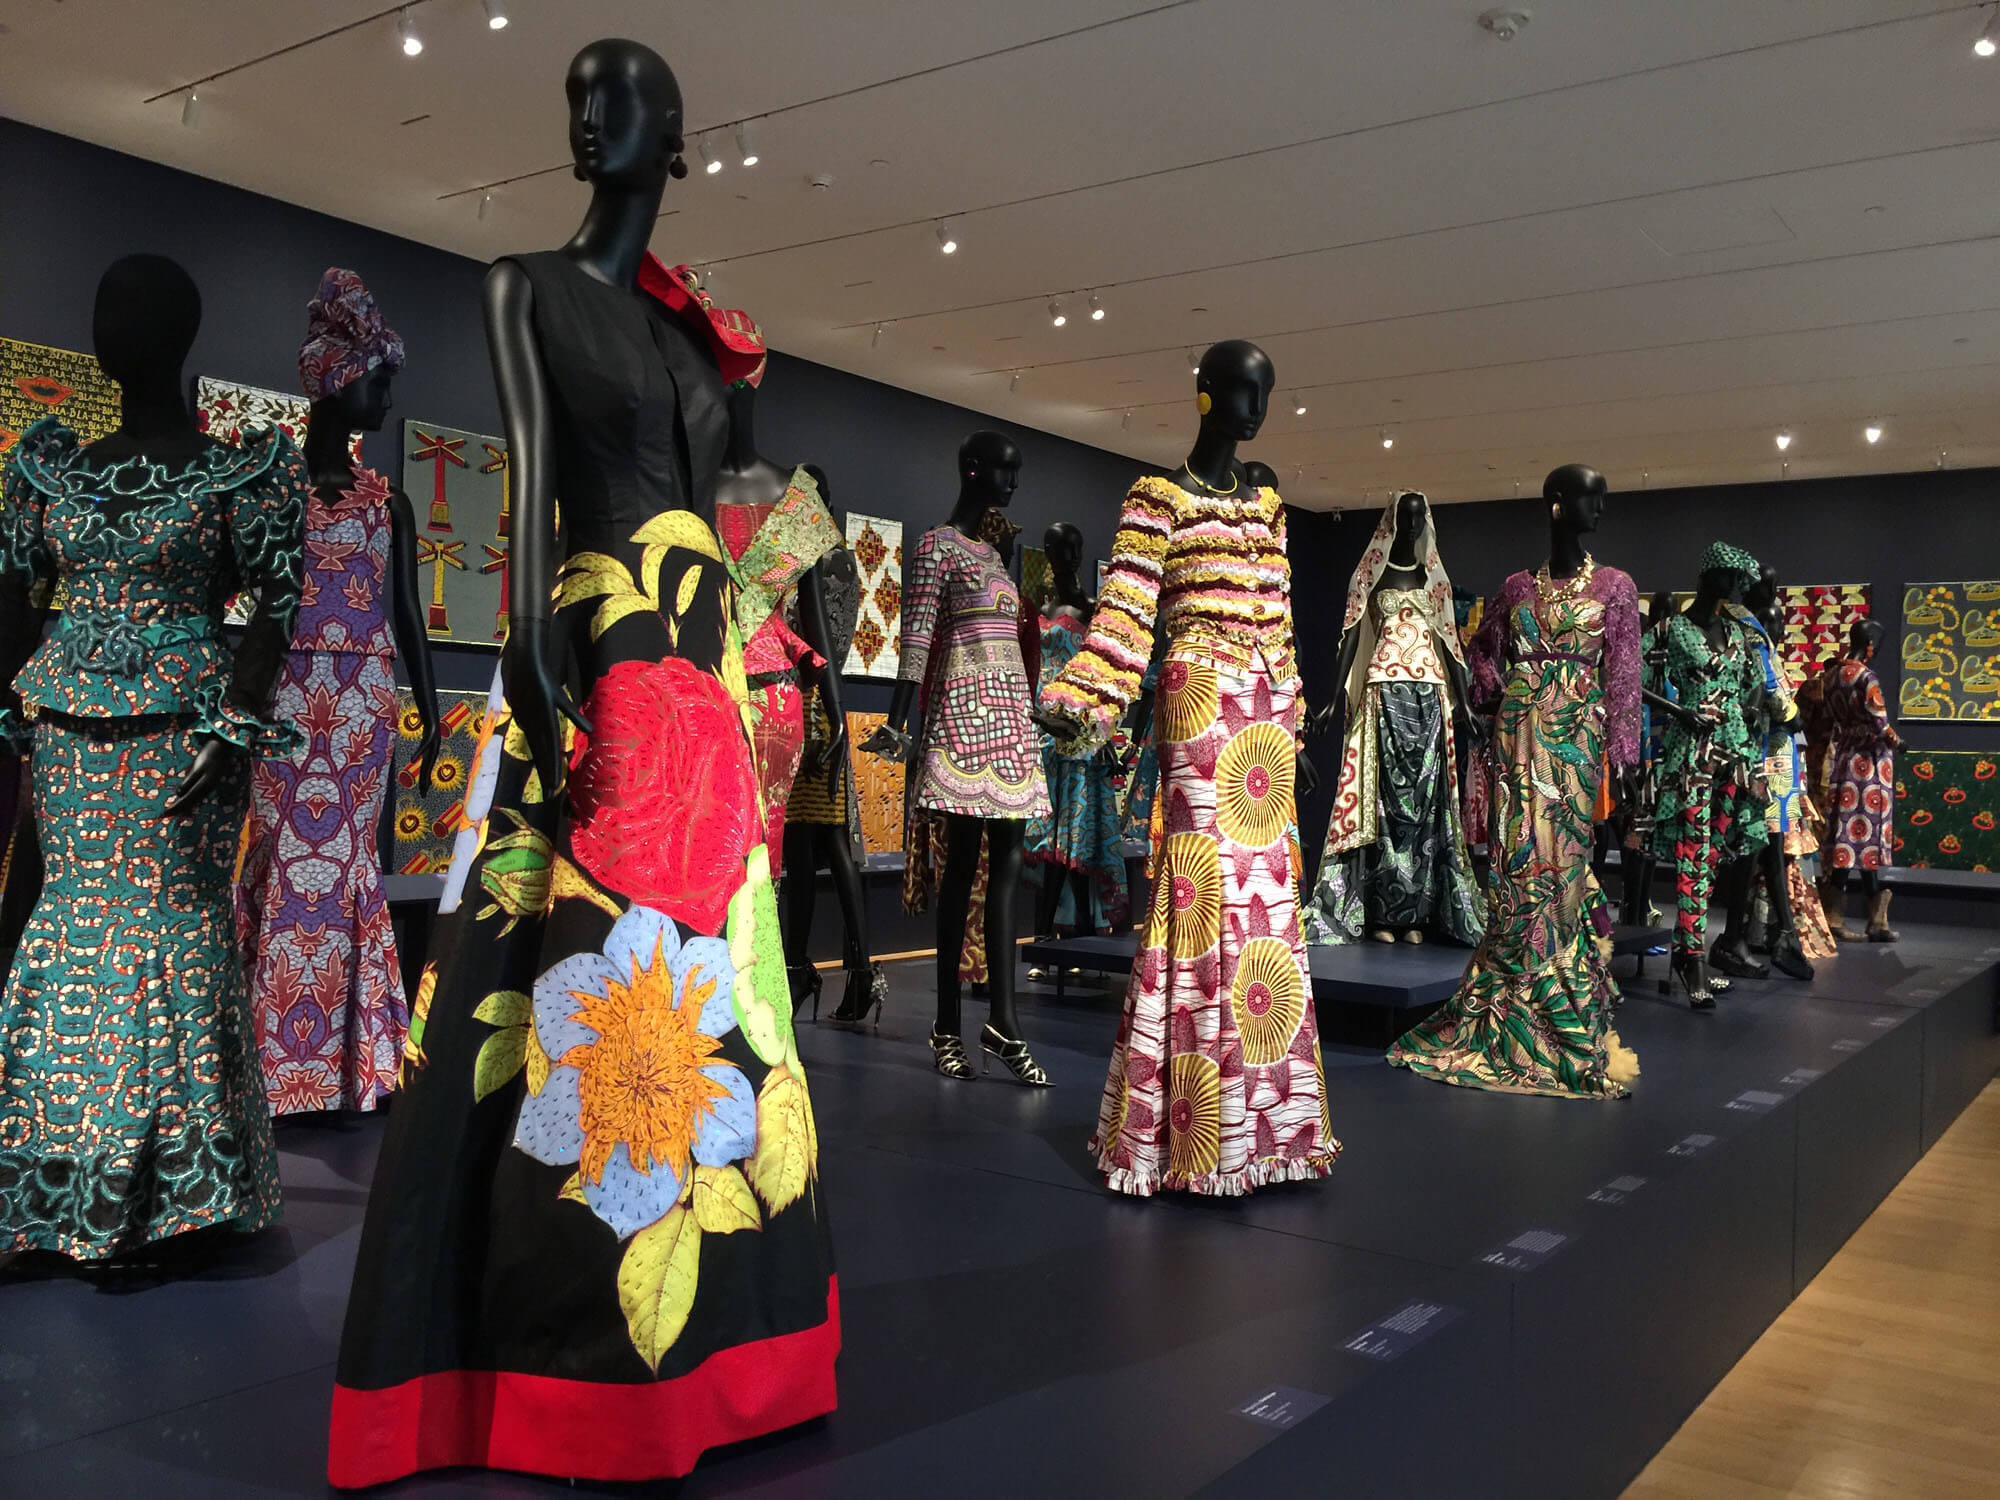 Dutch company Vlisco presents African fashion on a global scale. © Flickr / Laura Blanchard